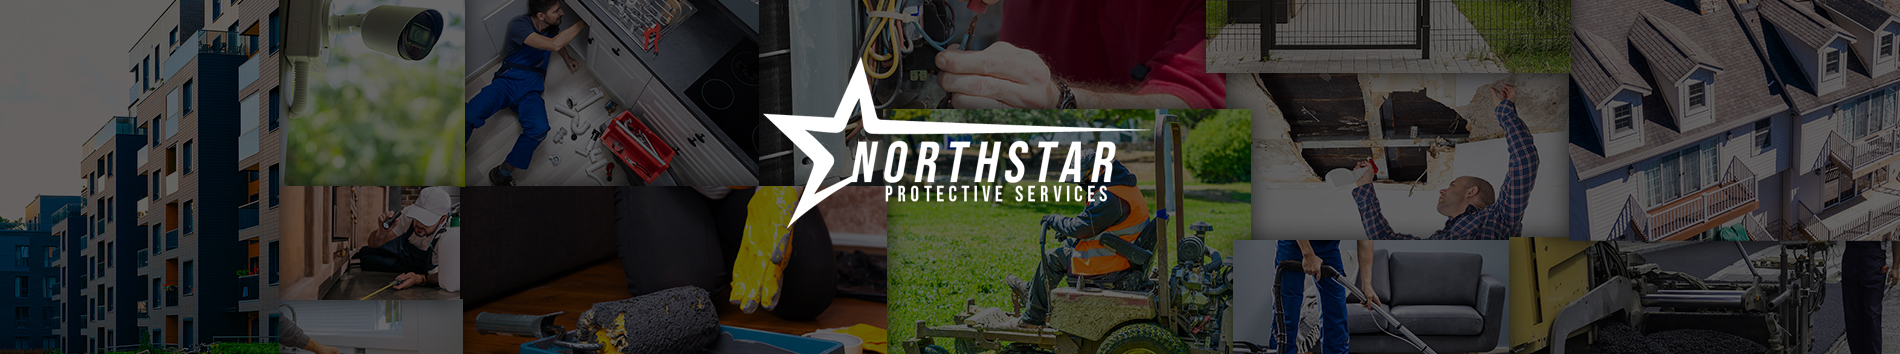 NorthStar Protective Services